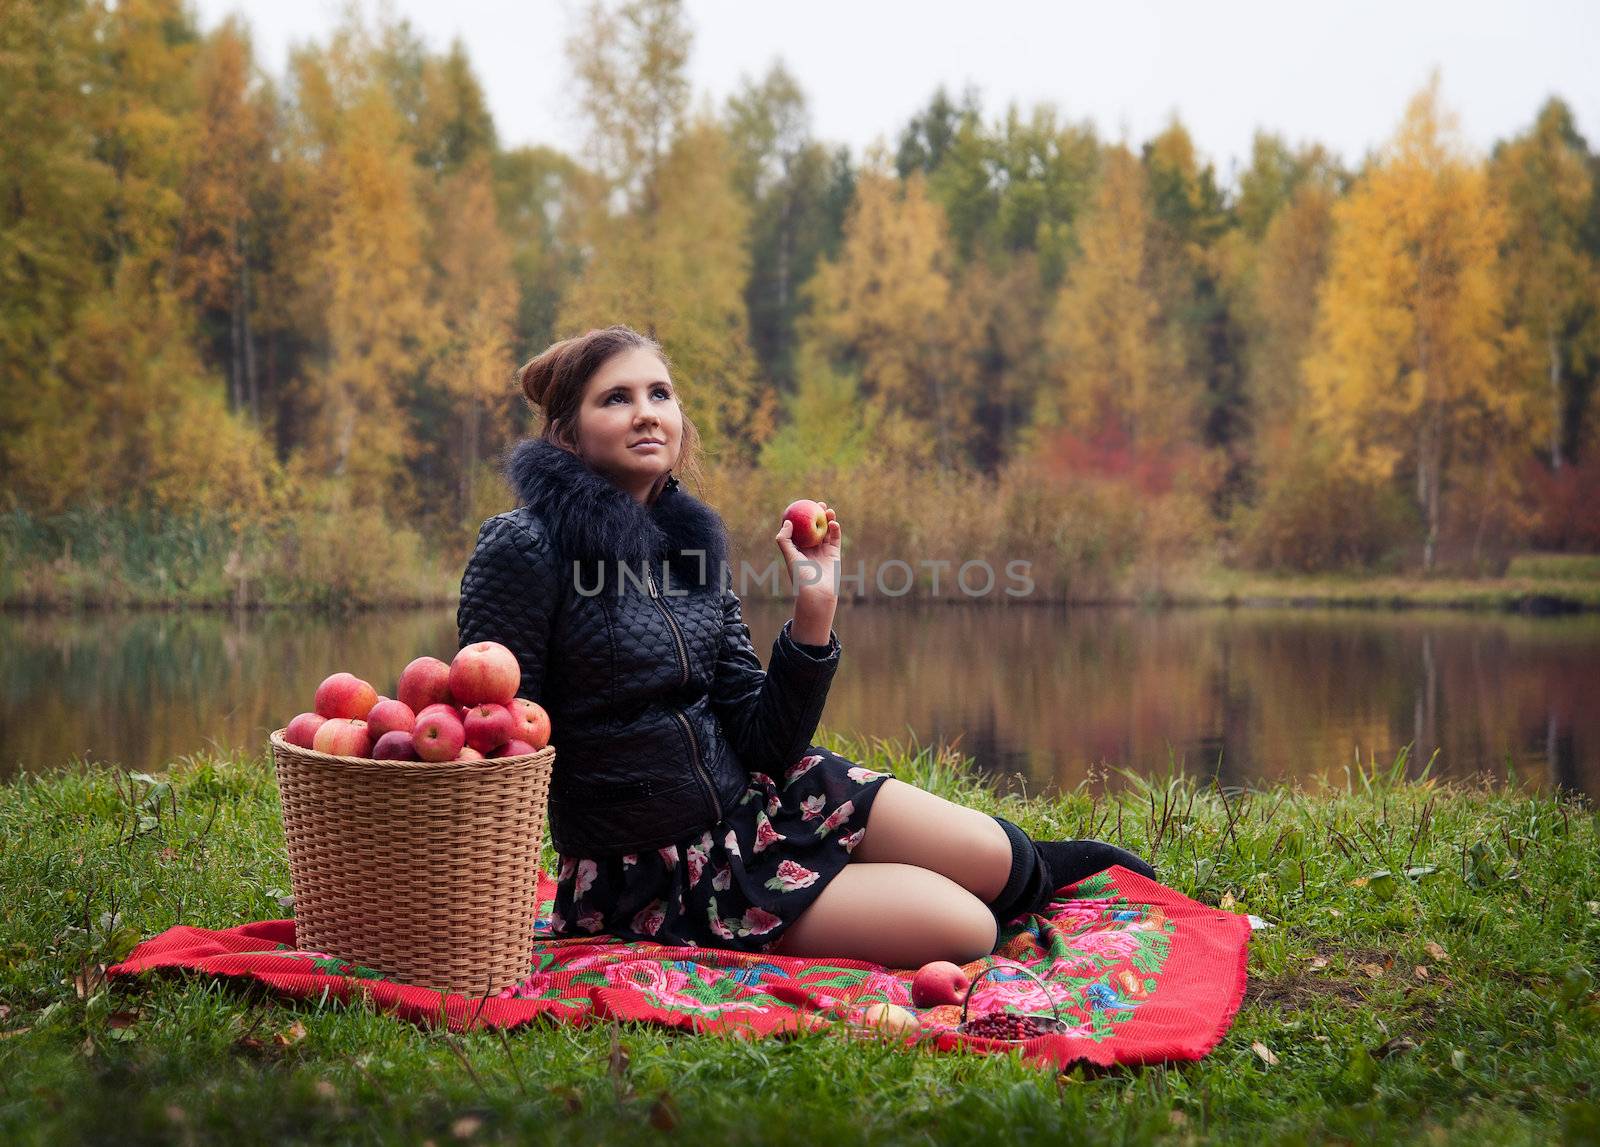 haughty woman with a basket of apples on a picnic